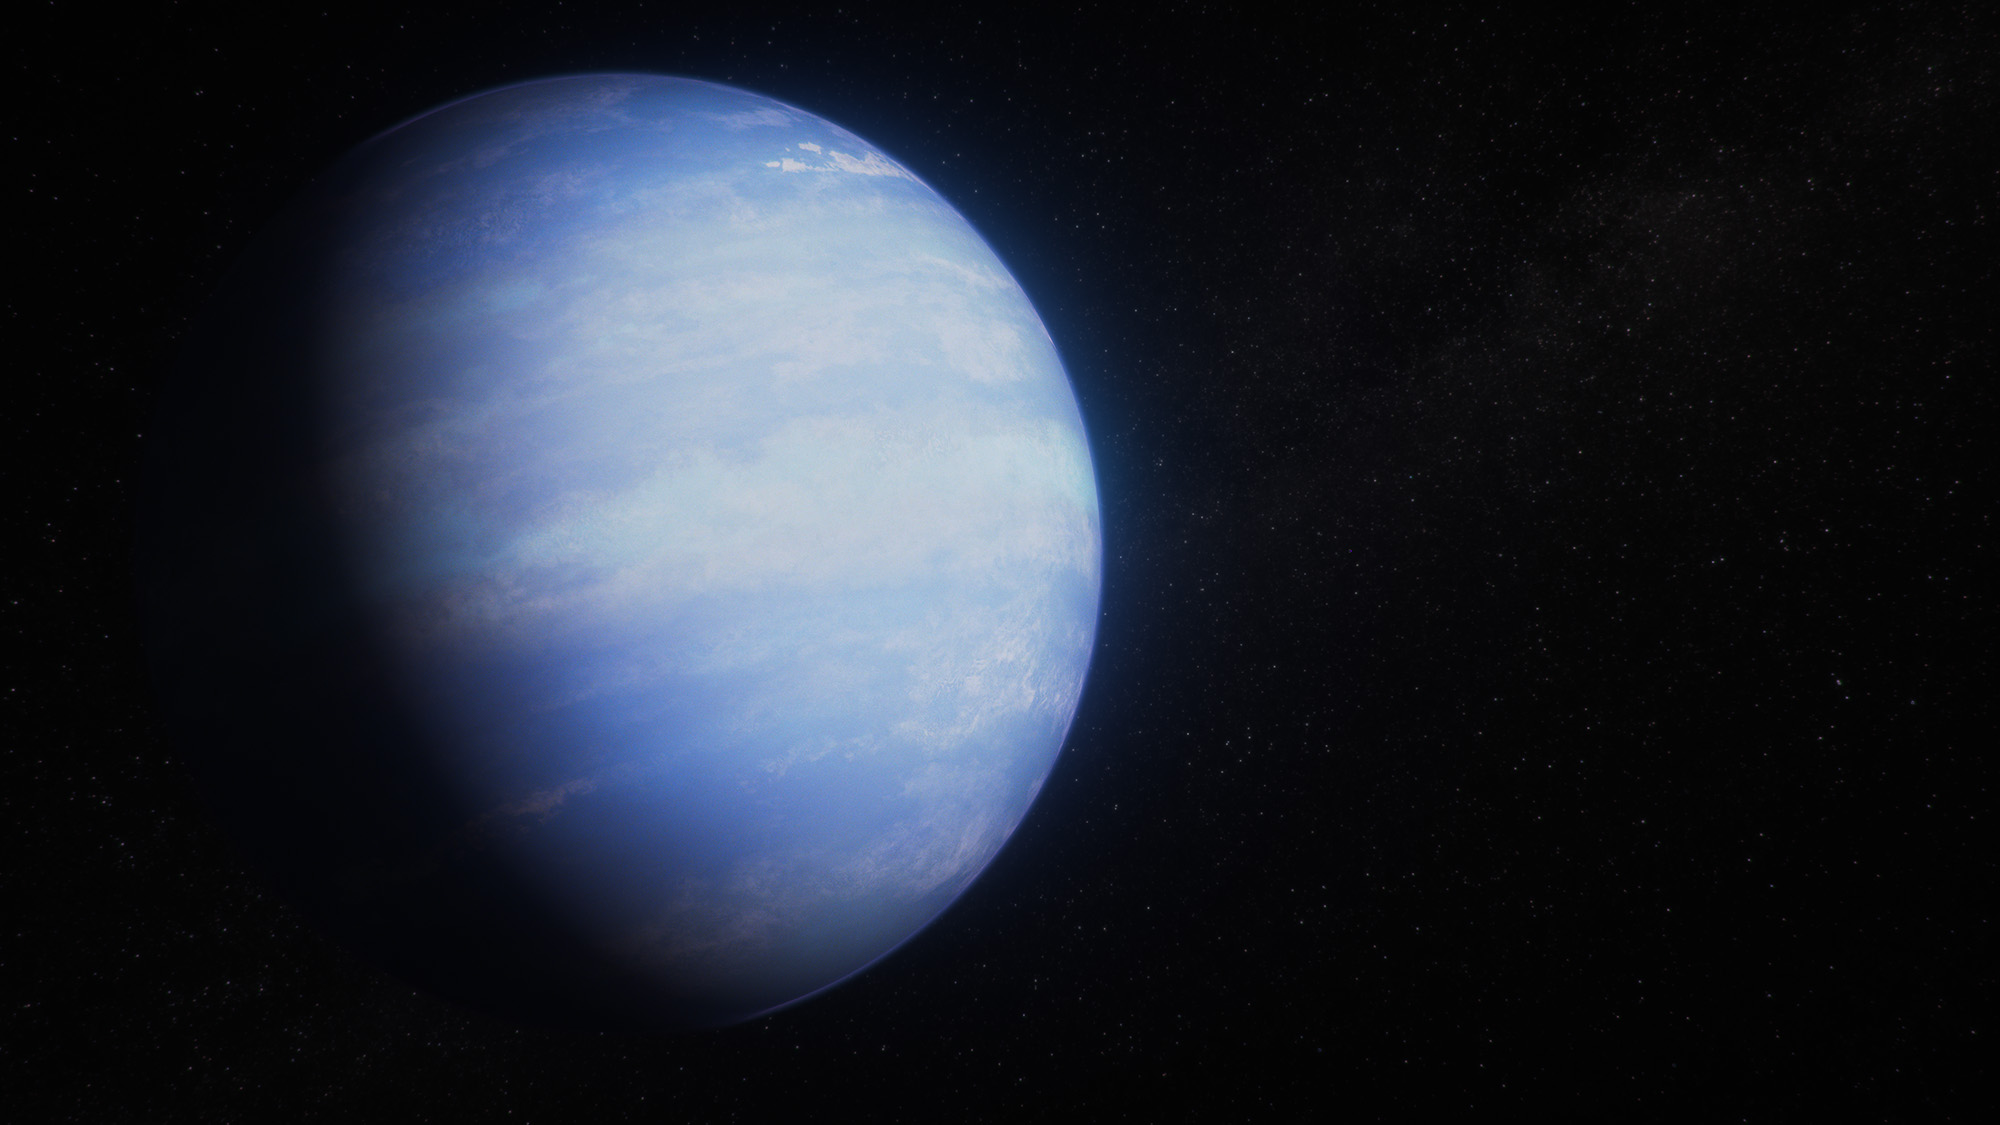 Illustration of an exoplanet with a hazy blue atmosphere and loose bands of clouds on the black background of space. The right three-quarters of the planet is lit by a star not shown in the illustration. The left quarter is in shadow. The terminator, the boundary between the day and night sides is gradual, not sharp. The planet is light blue with loose bands of white clouds. The limb of the planet (the edge) has a subtle blue glow.